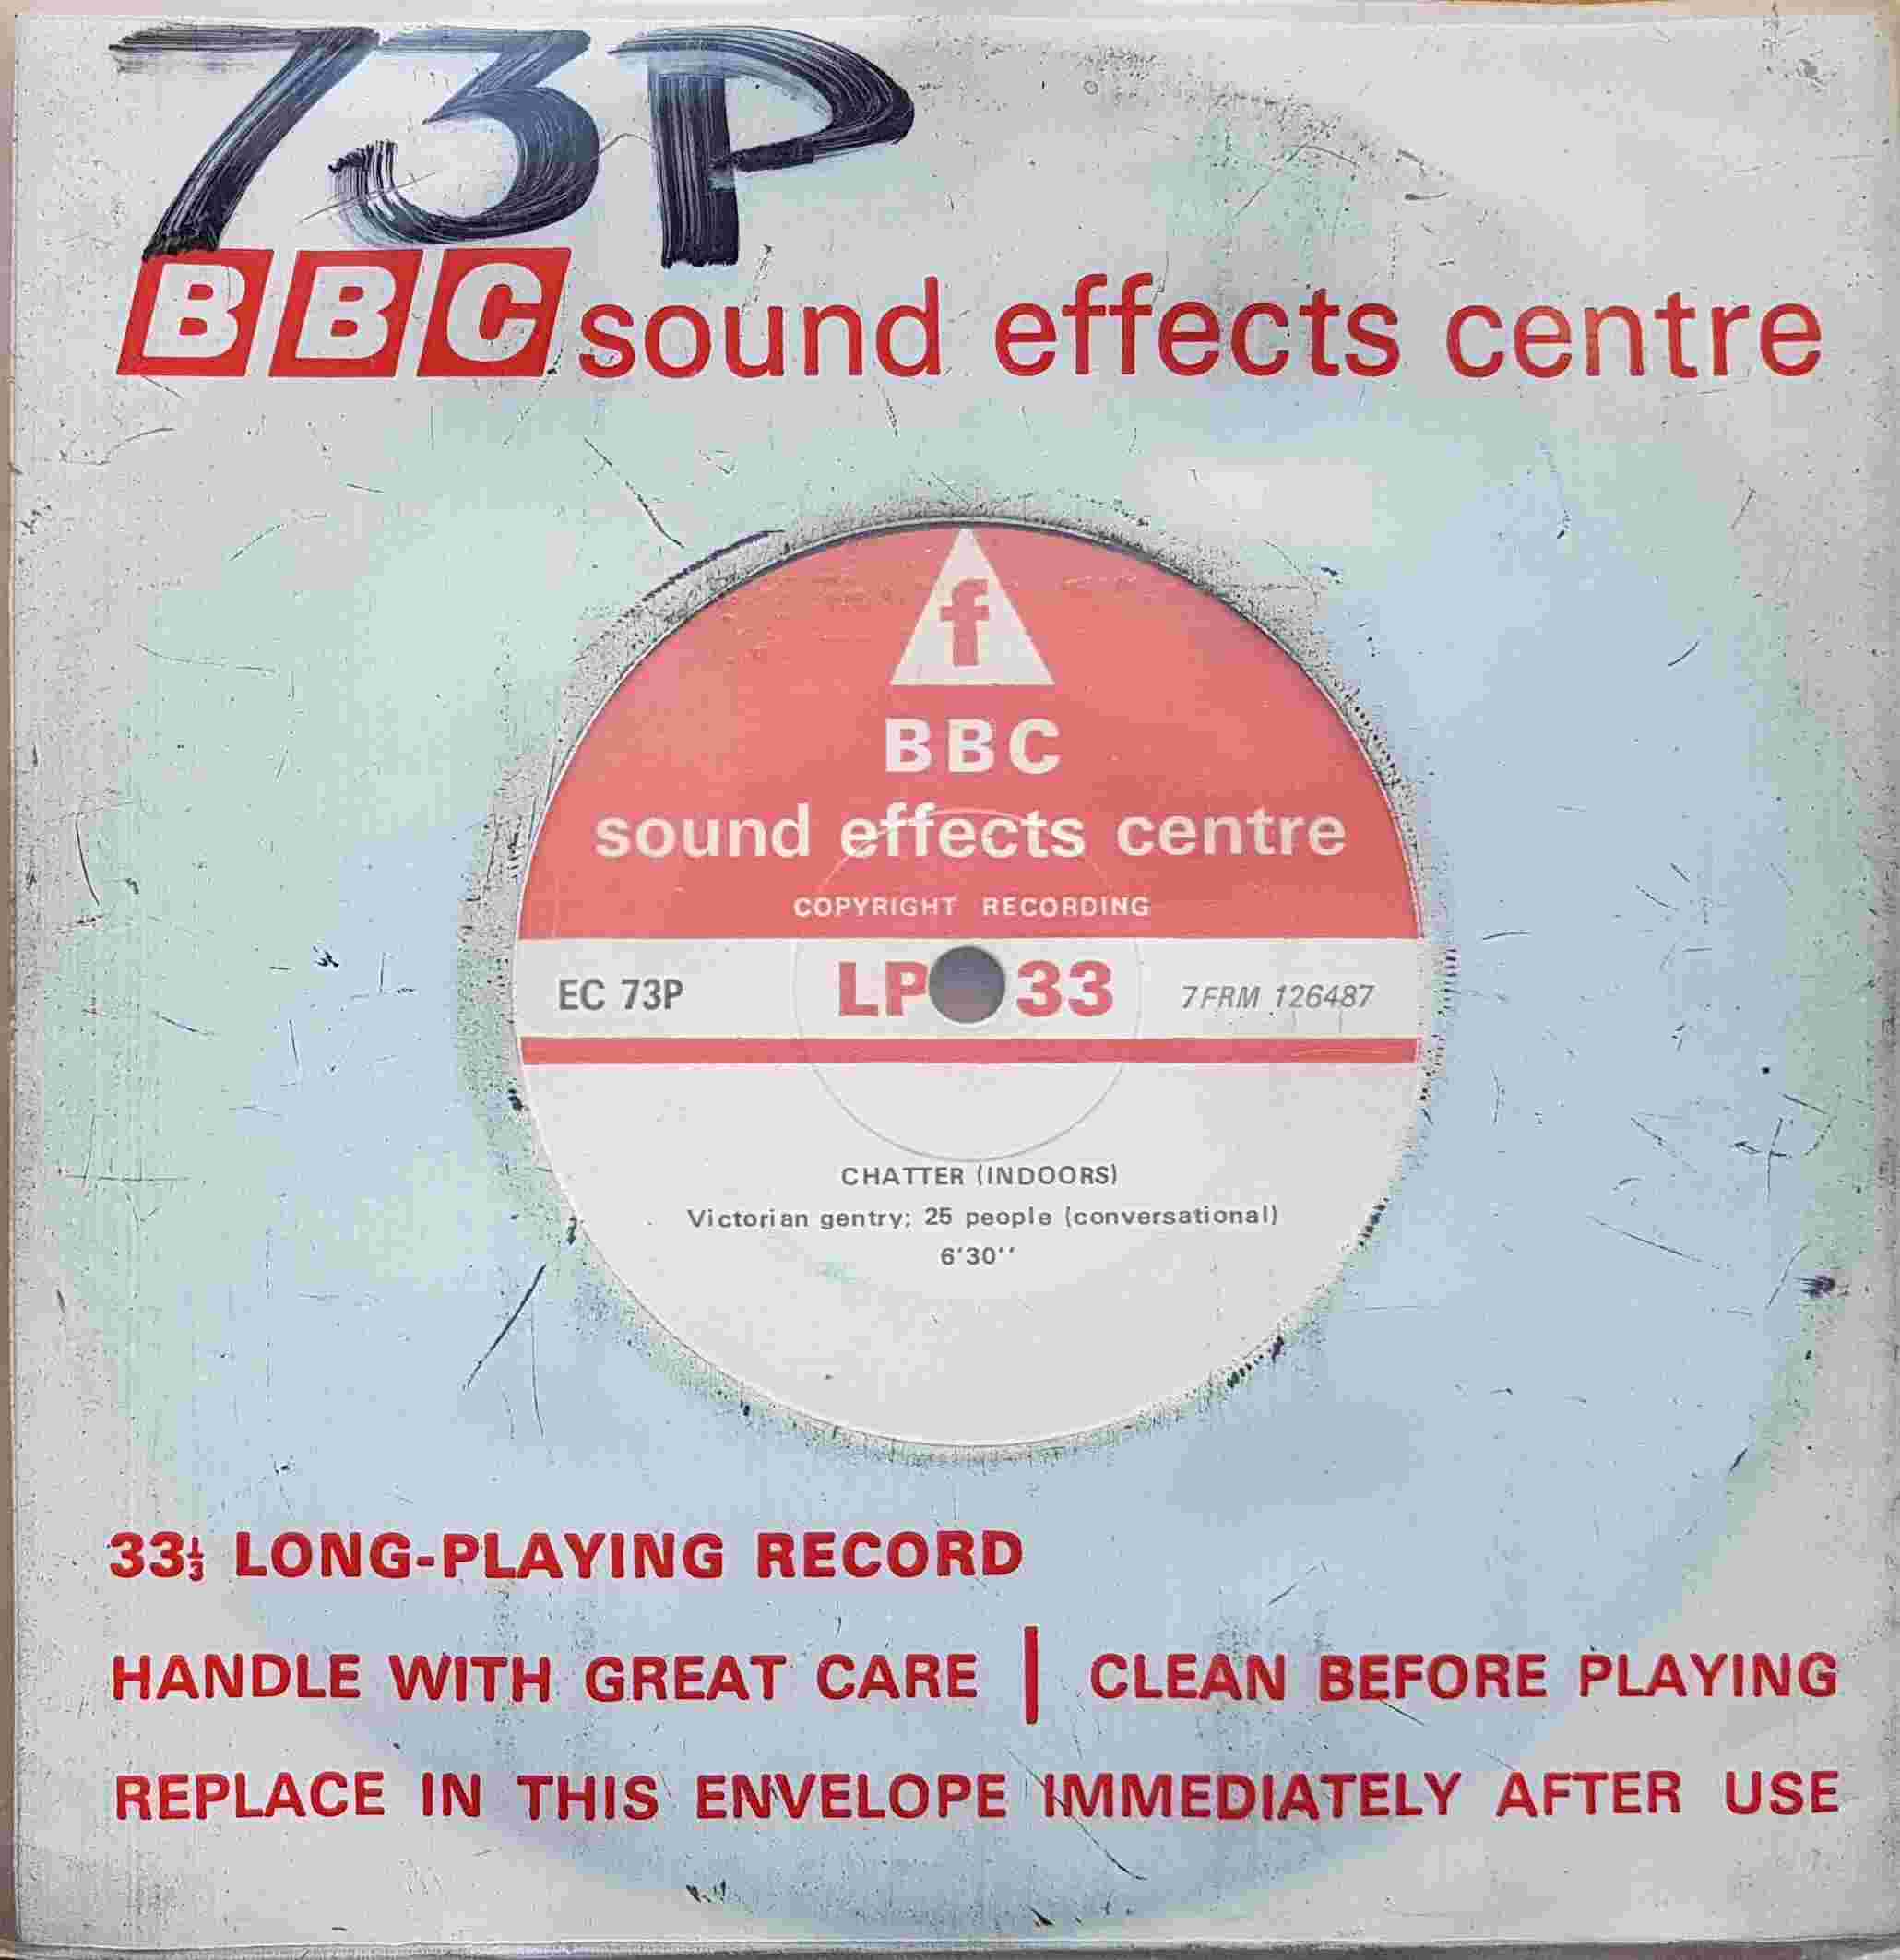 Picture of EC 73P Chatter (Indoors) by artist Not registered from the BBC singles - Records and Tapes library